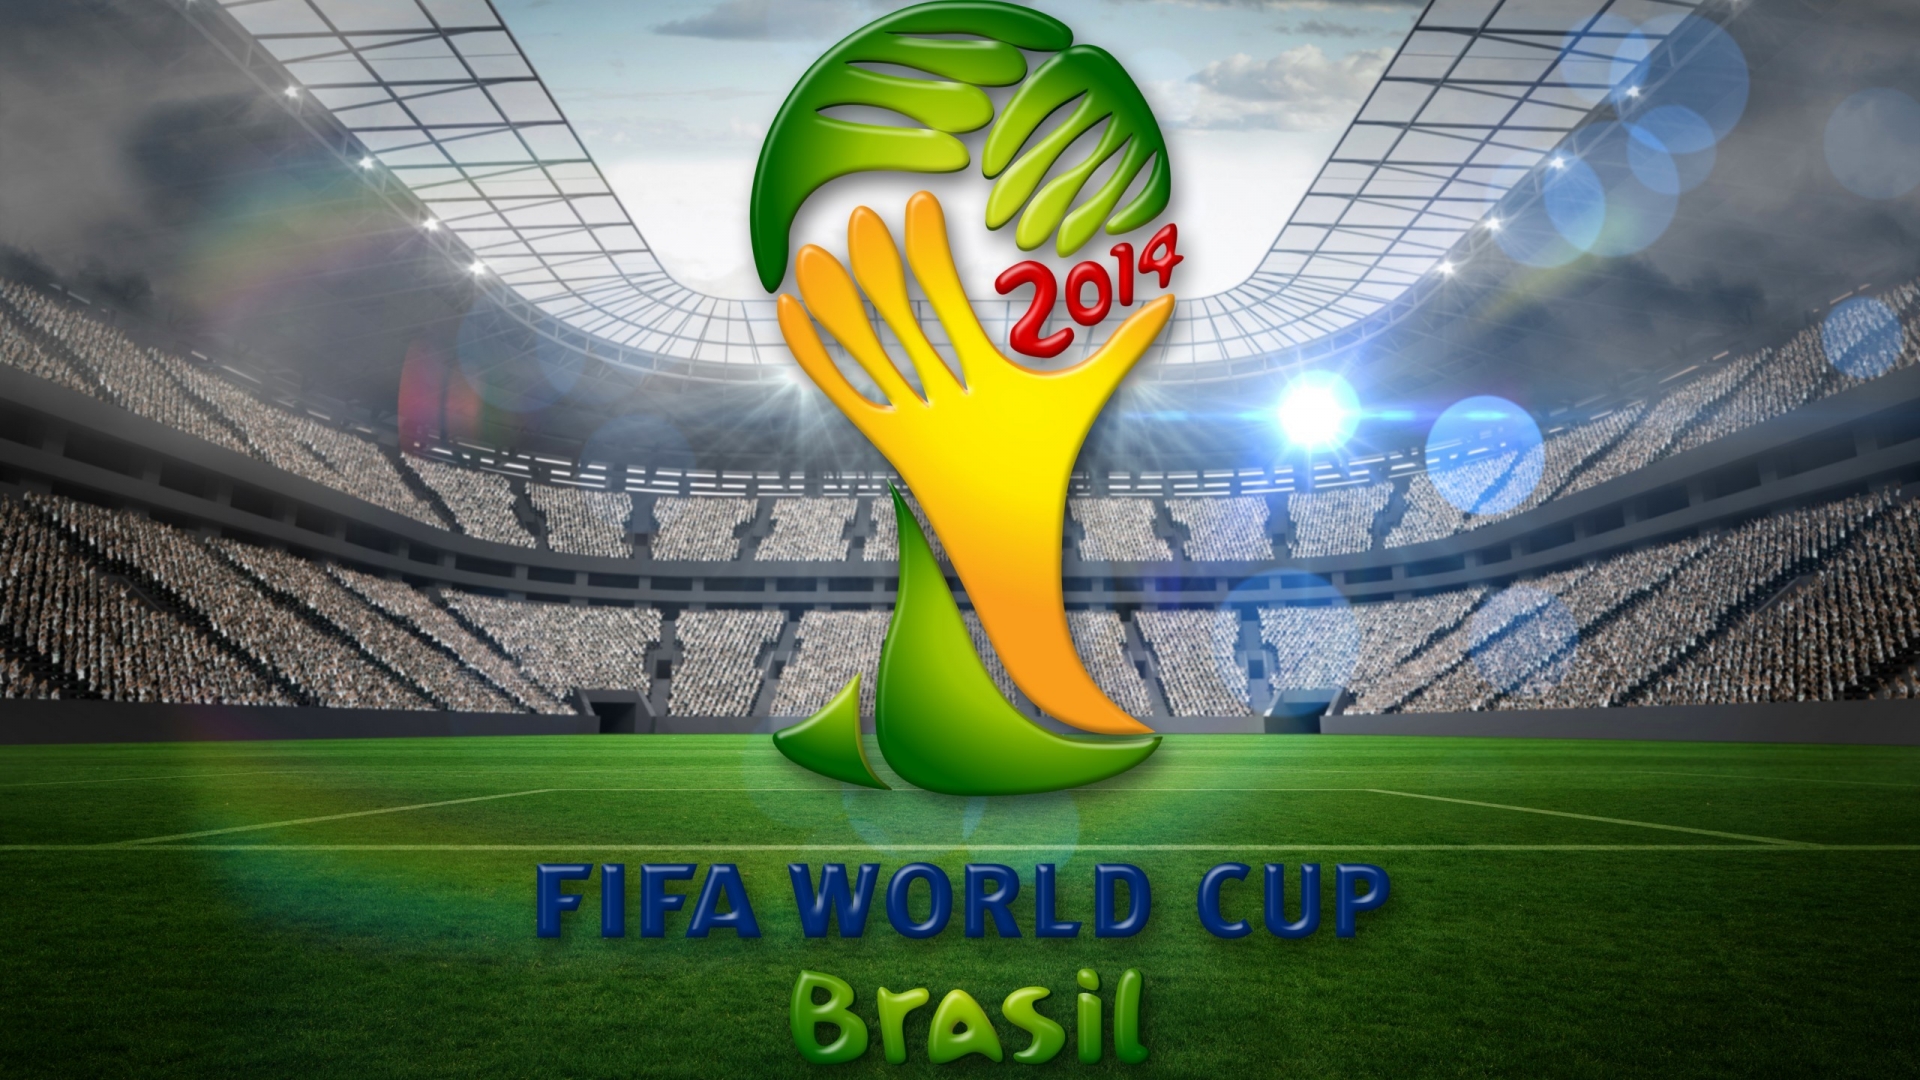 2014 Brasil World Cup for 1920 x 1080 HDTV 1080p resolution